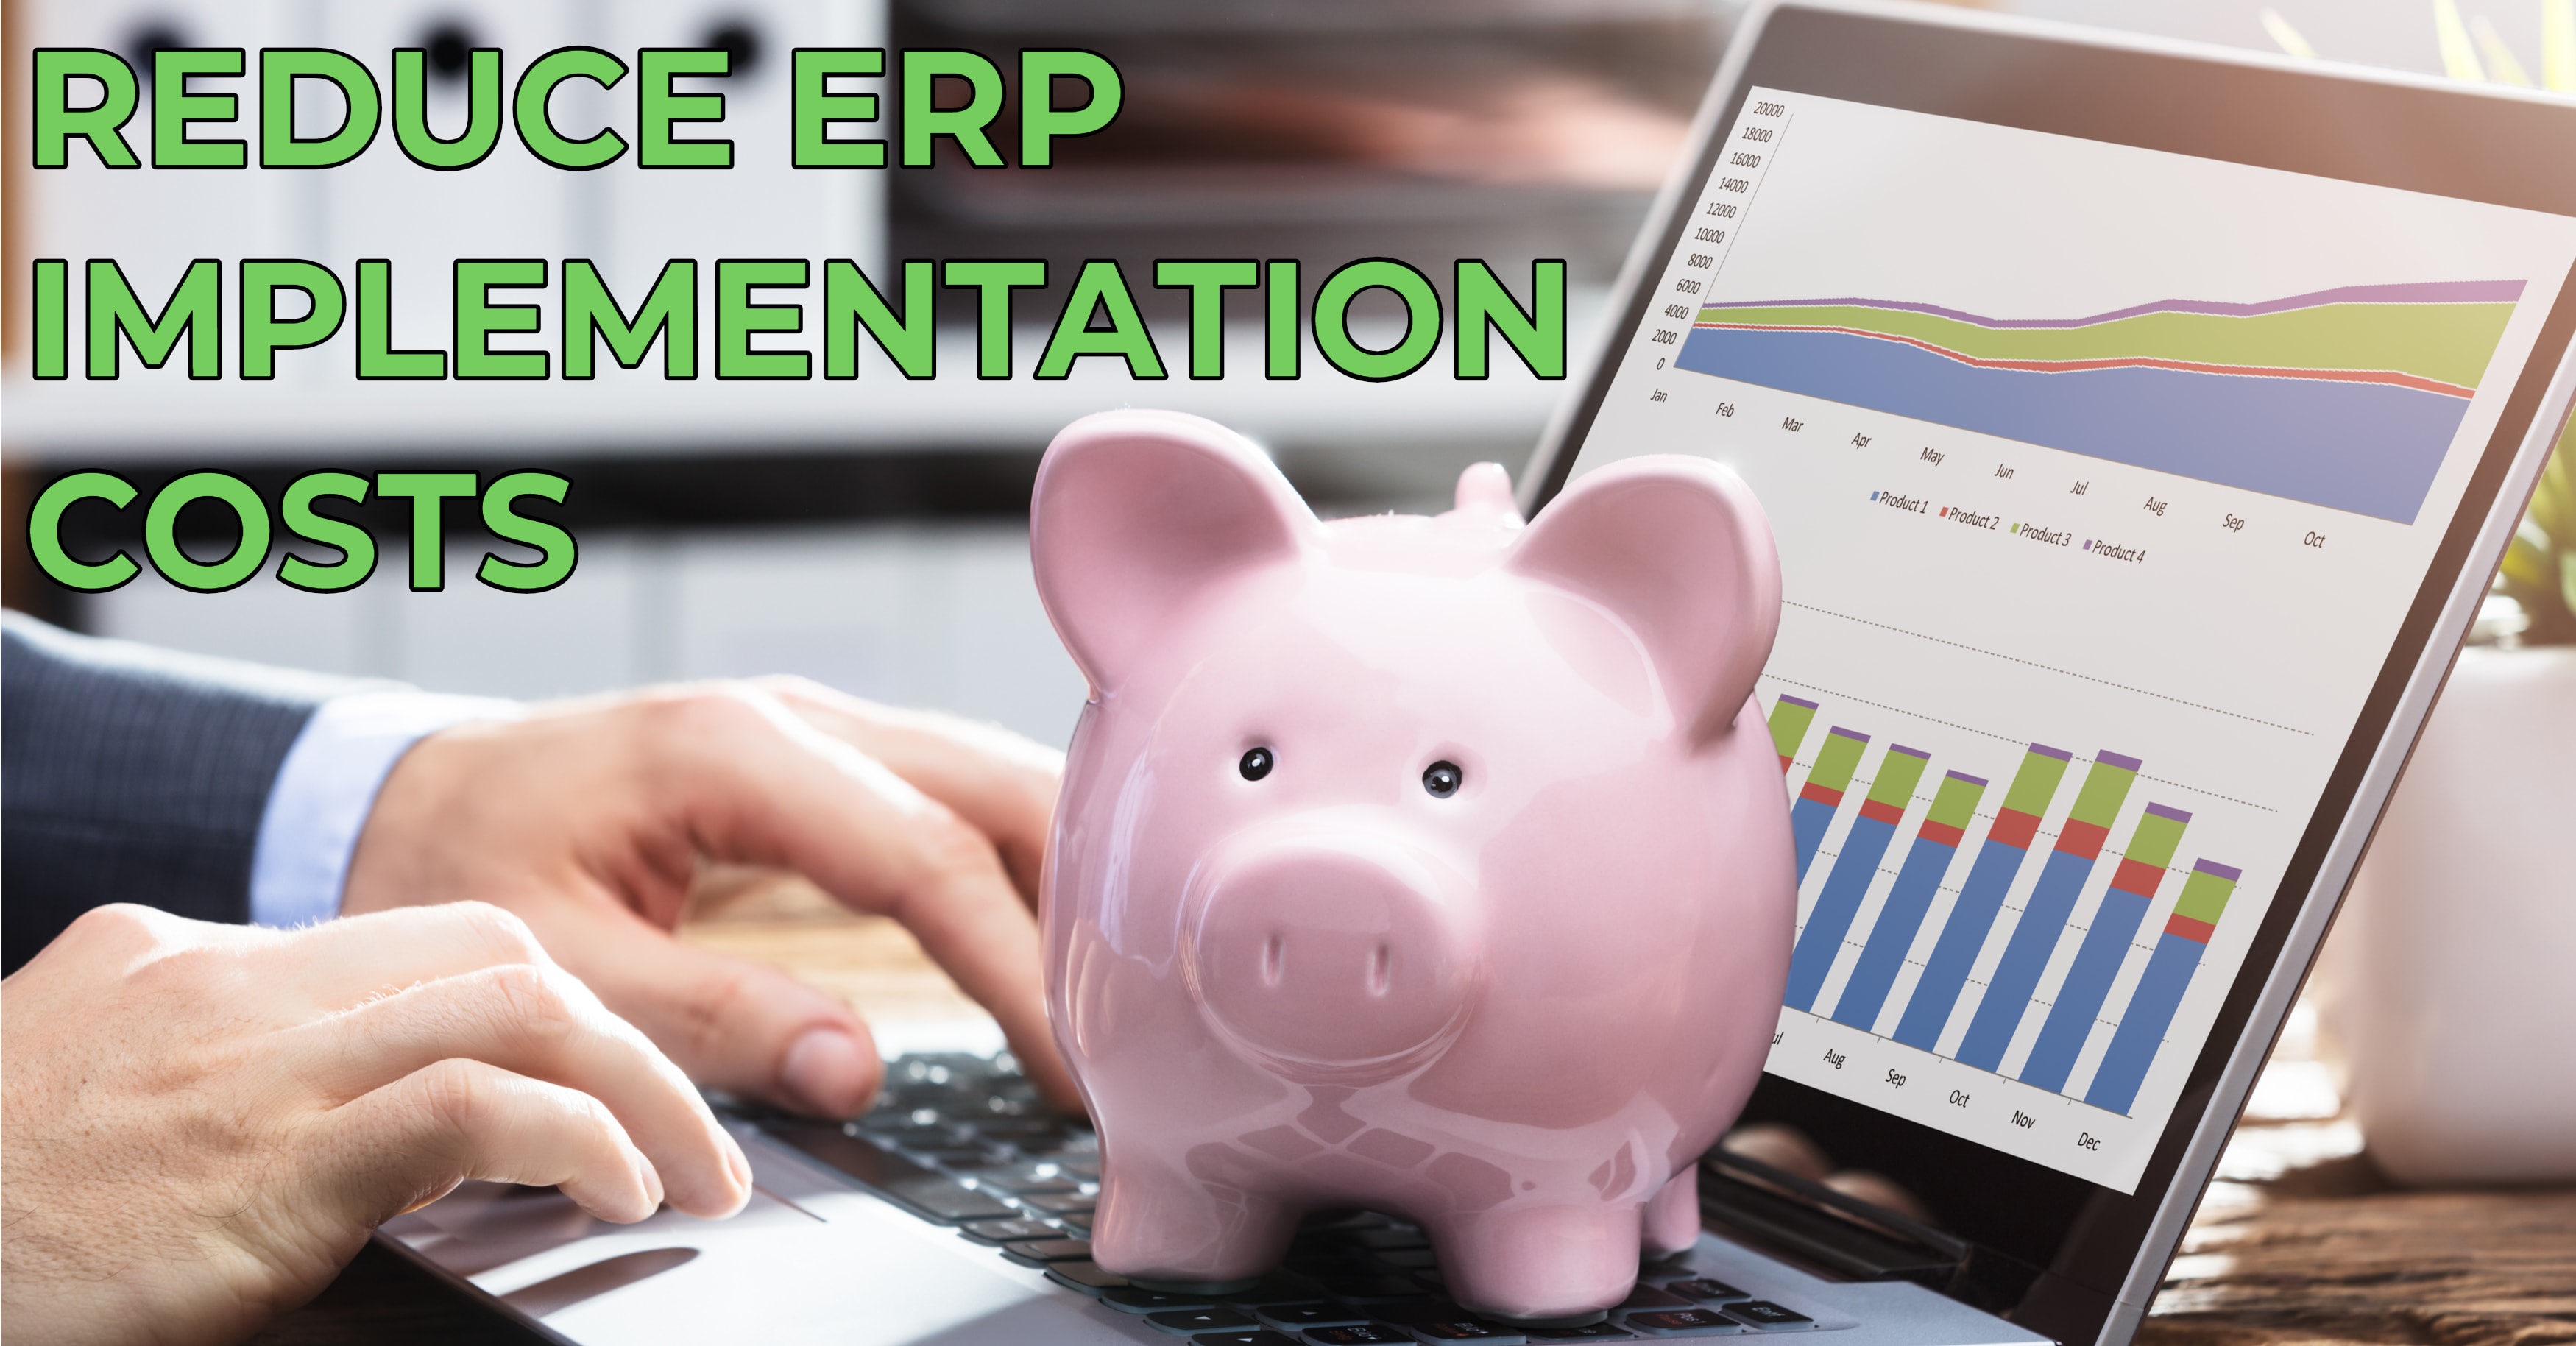 How to Reduce ERP Implementation Costs